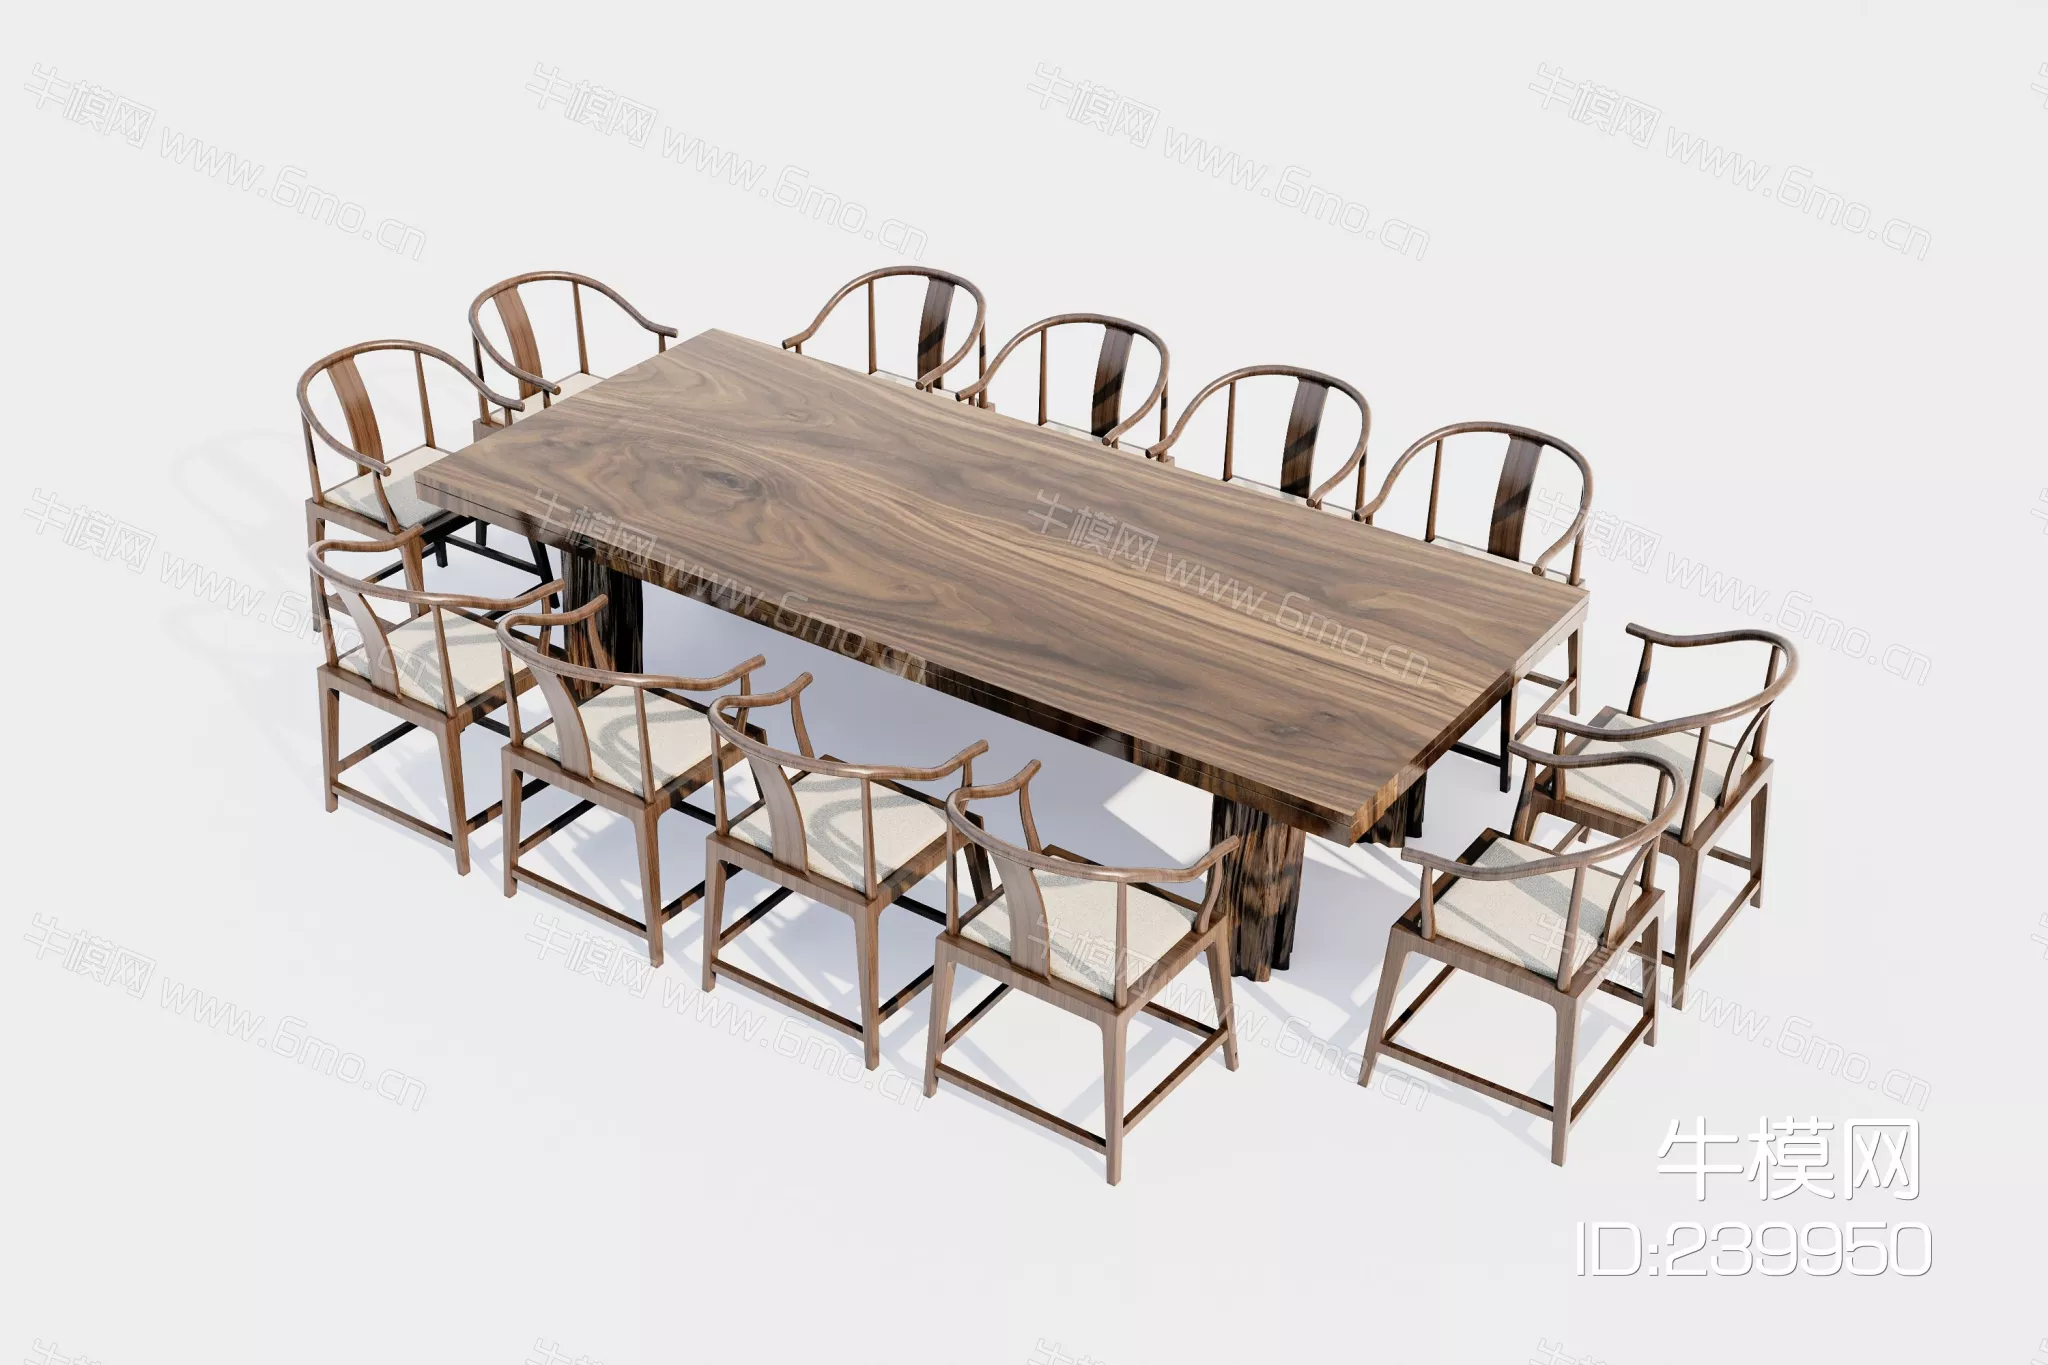 CHINESE DINING TABLE SET - SKETCHUP 3D MODEL - ENSCAPE - 239950